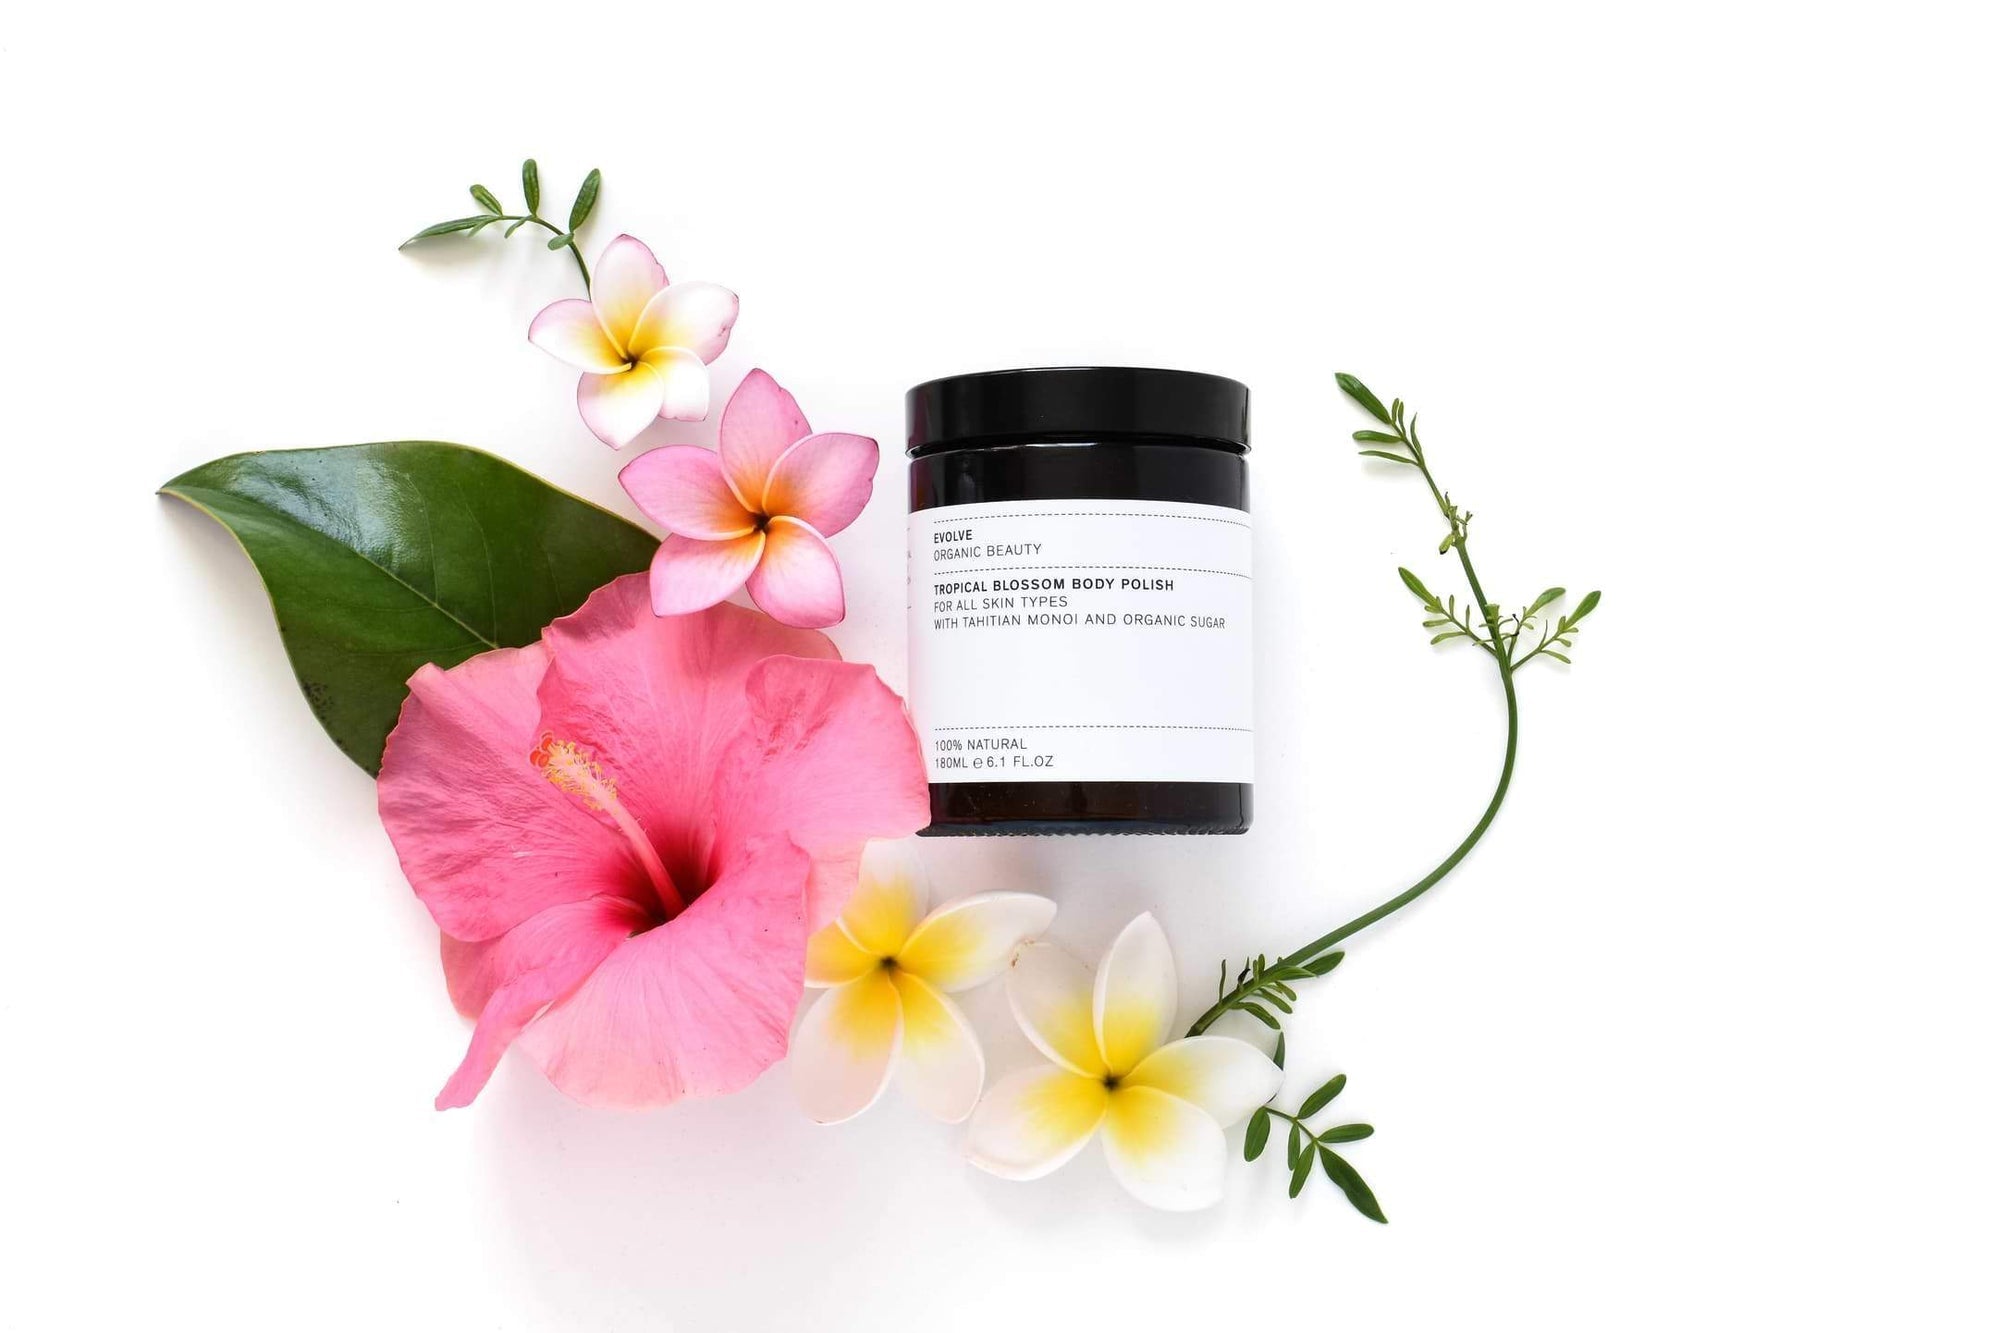 Gommage corps monoï & coco Tropical blossom body polish Evolve Beauty Suisse